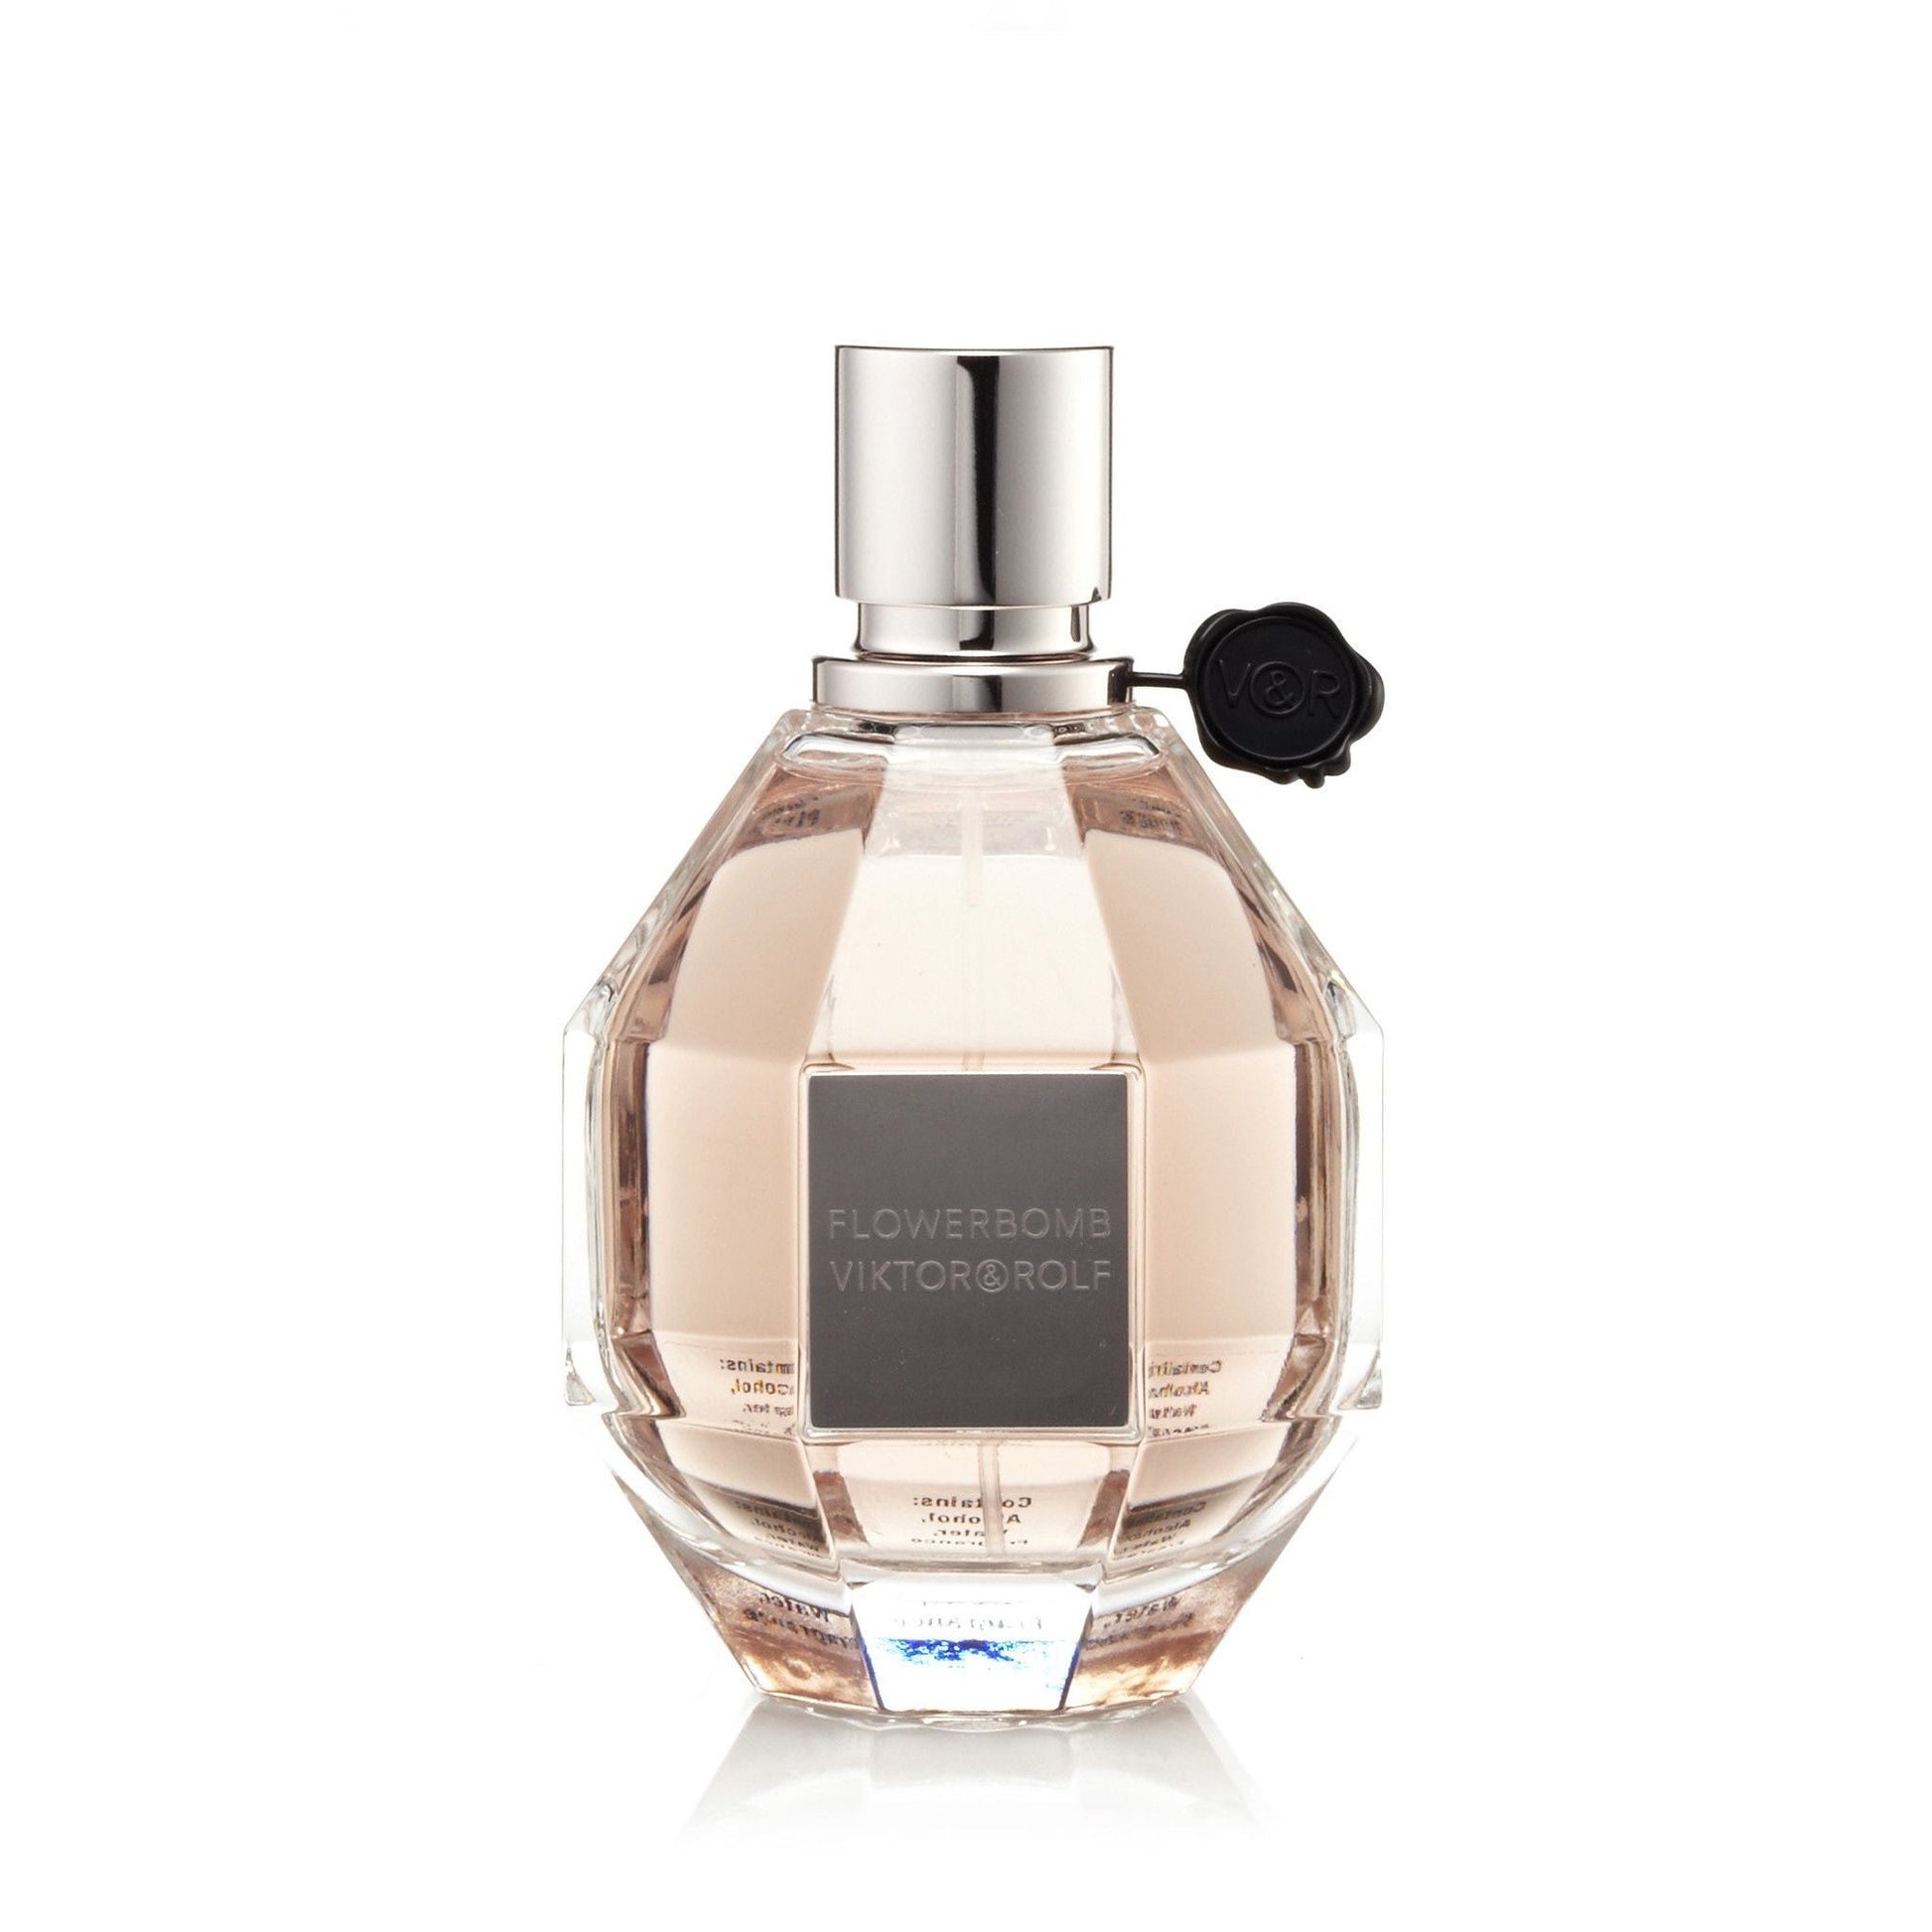 Flowerbomb EDP for Women by Viktor & Rolf, Product image 5